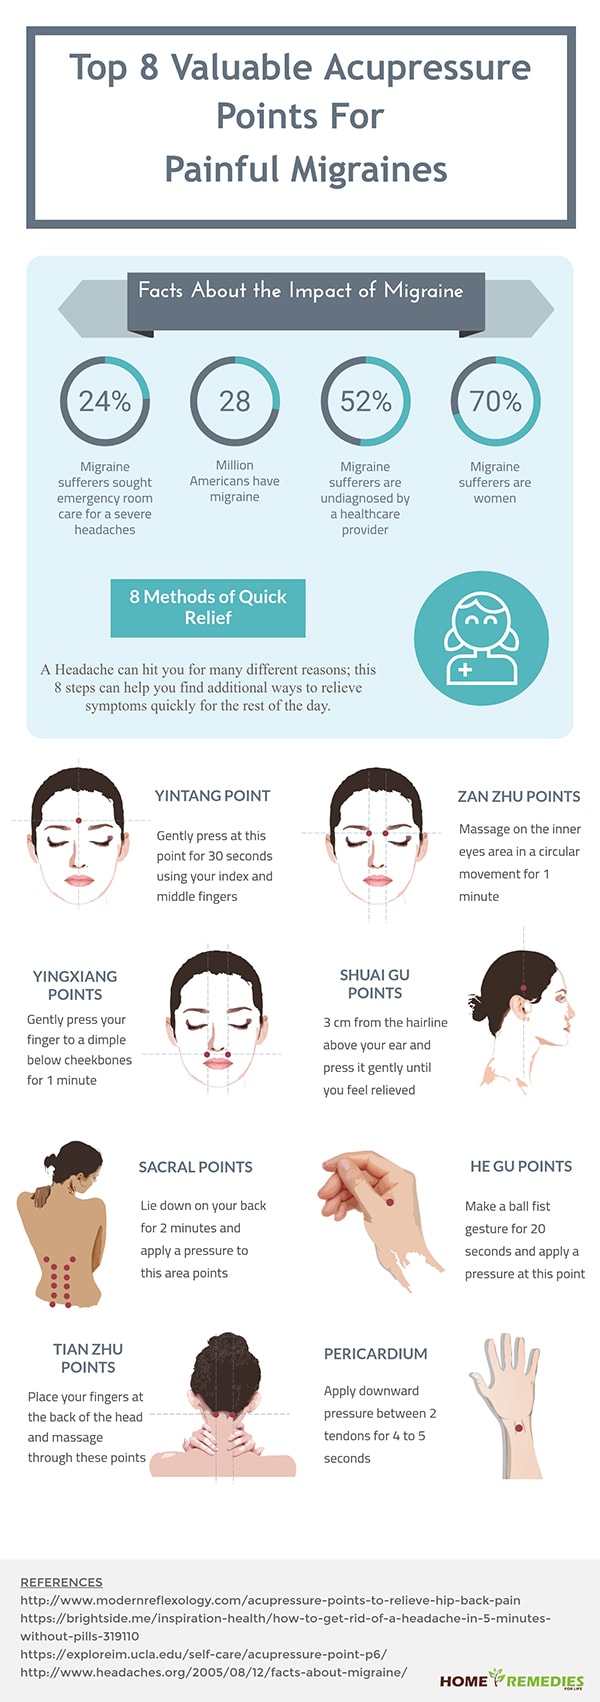 Top 8 Valuable Acupressure Points For Painful Migraines - Infographic